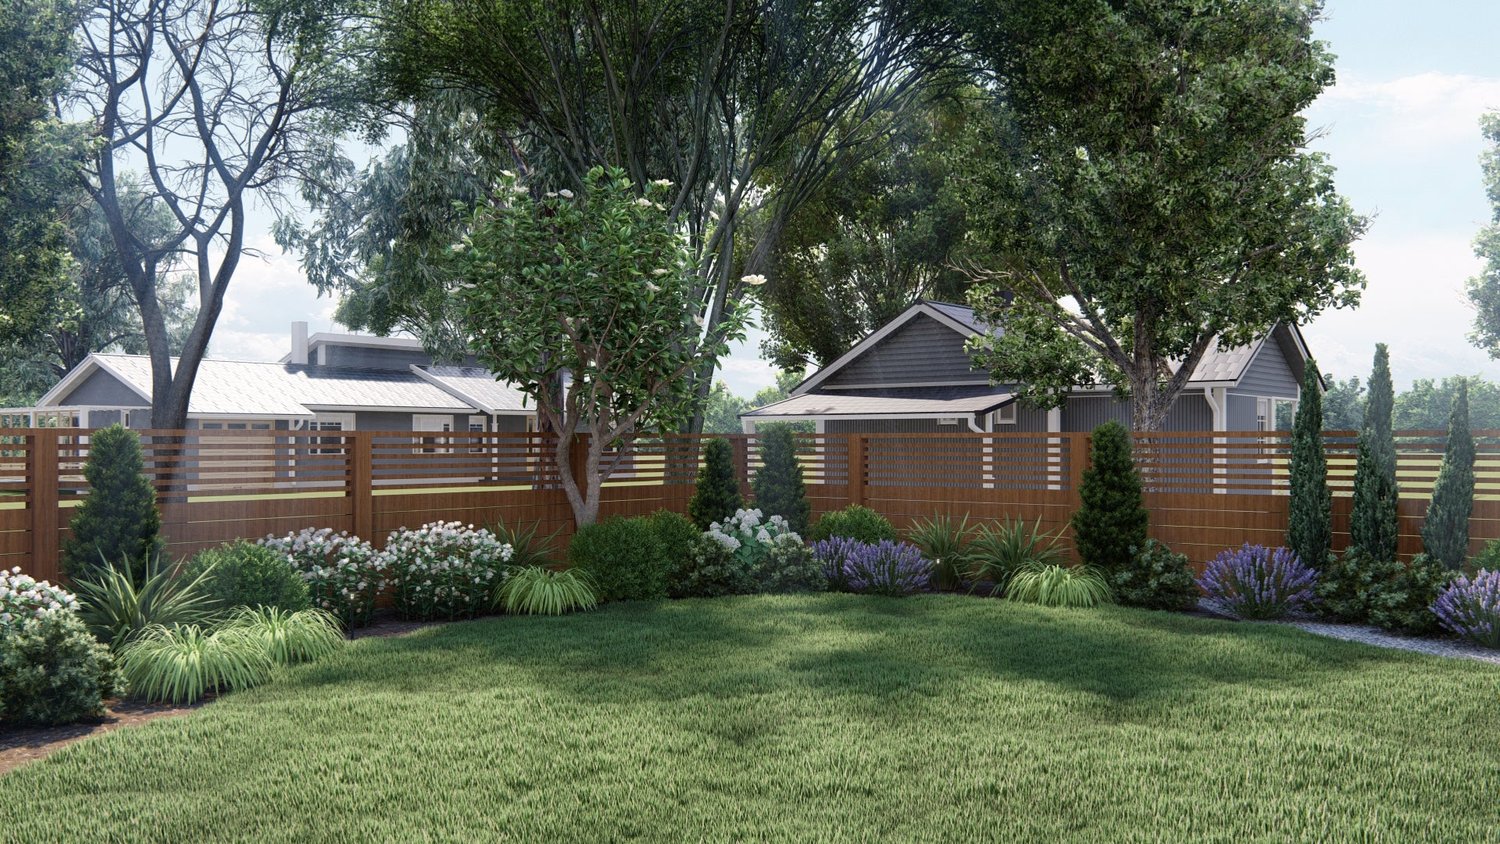 Burlington yard with garden and trees enclosed in wooden fence